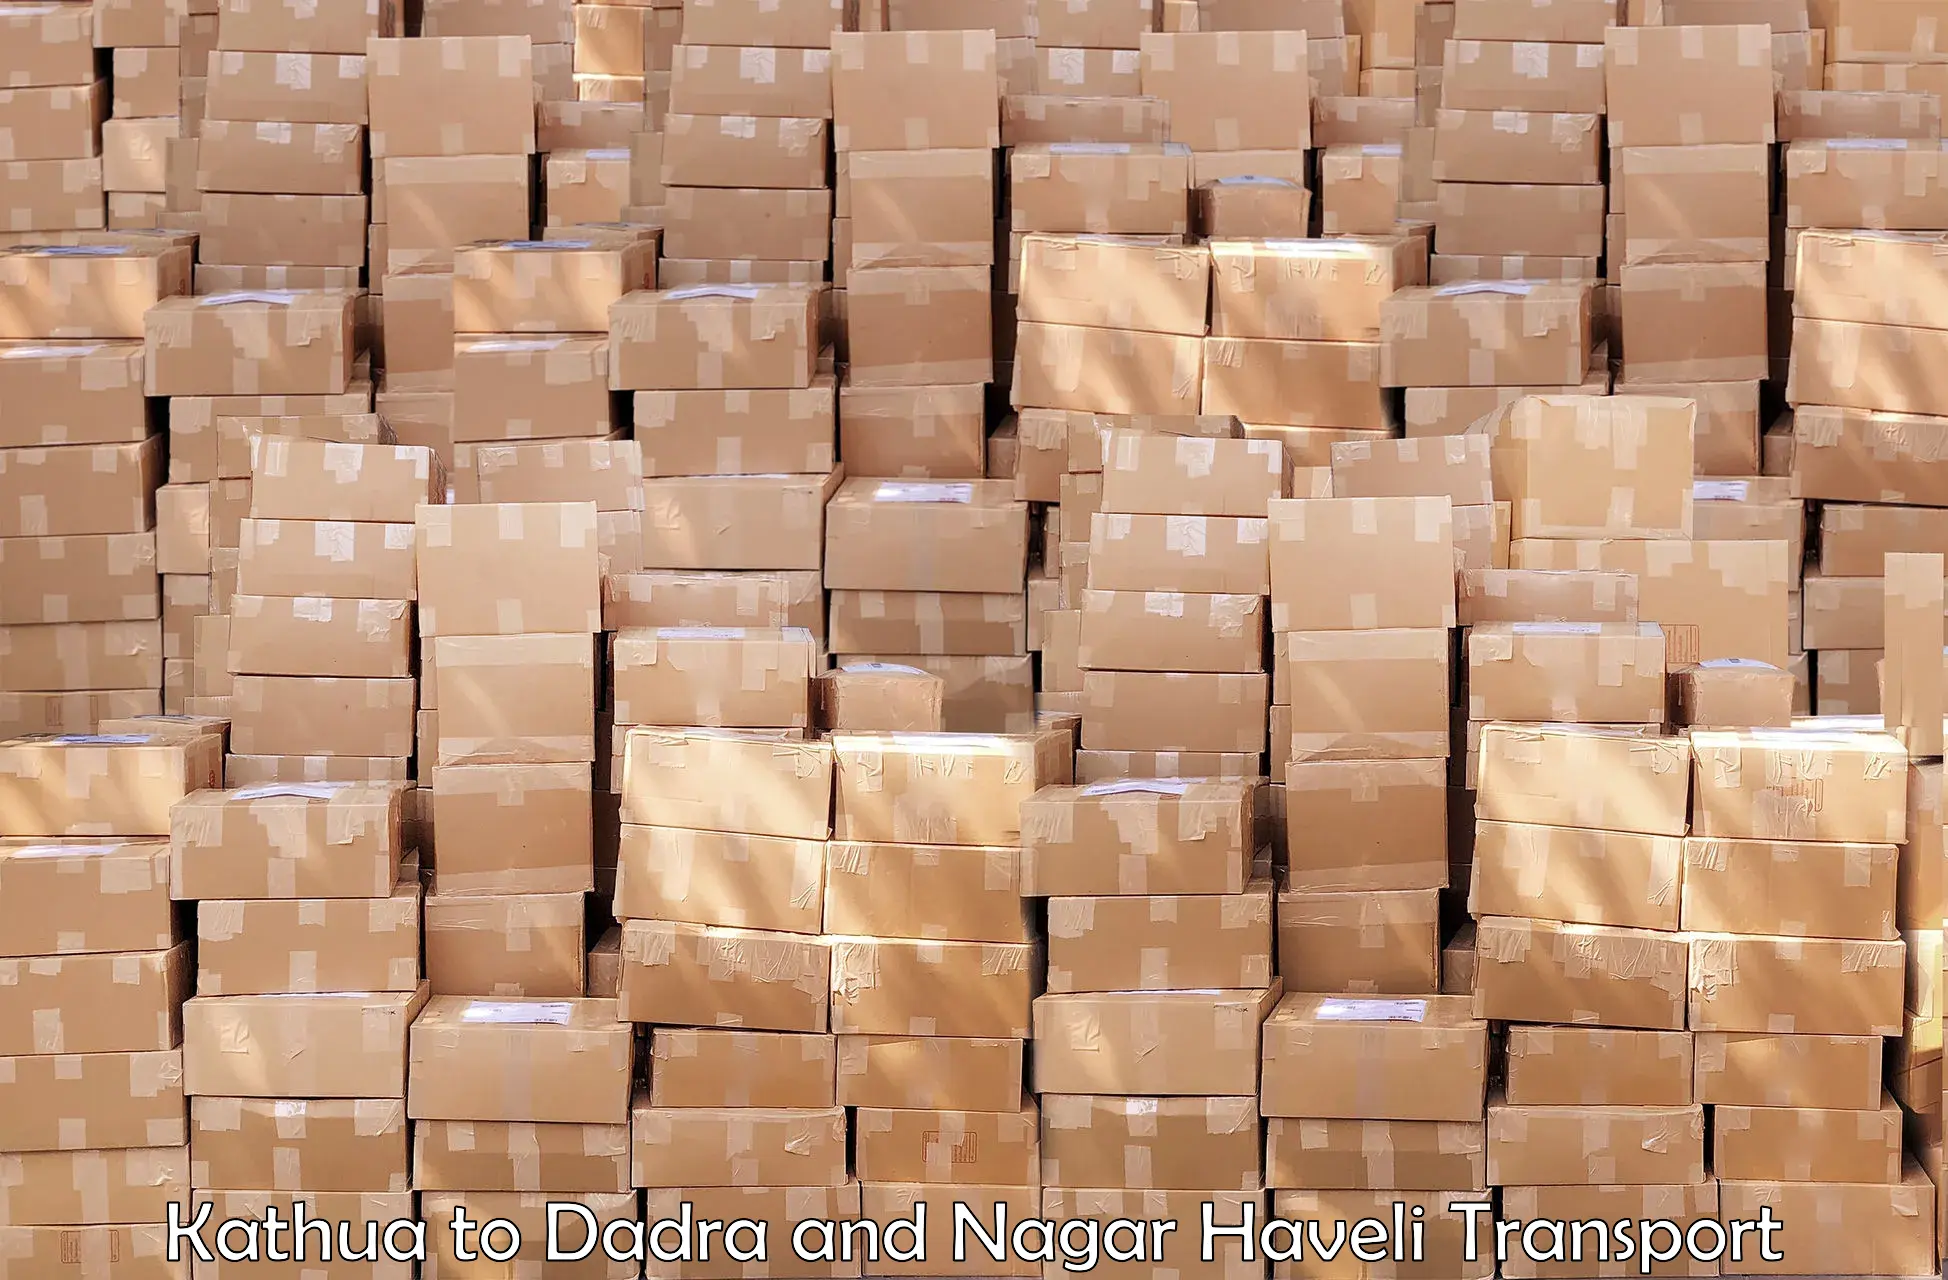 Daily parcel service transport Kathua to Dadra and Nagar Haveli